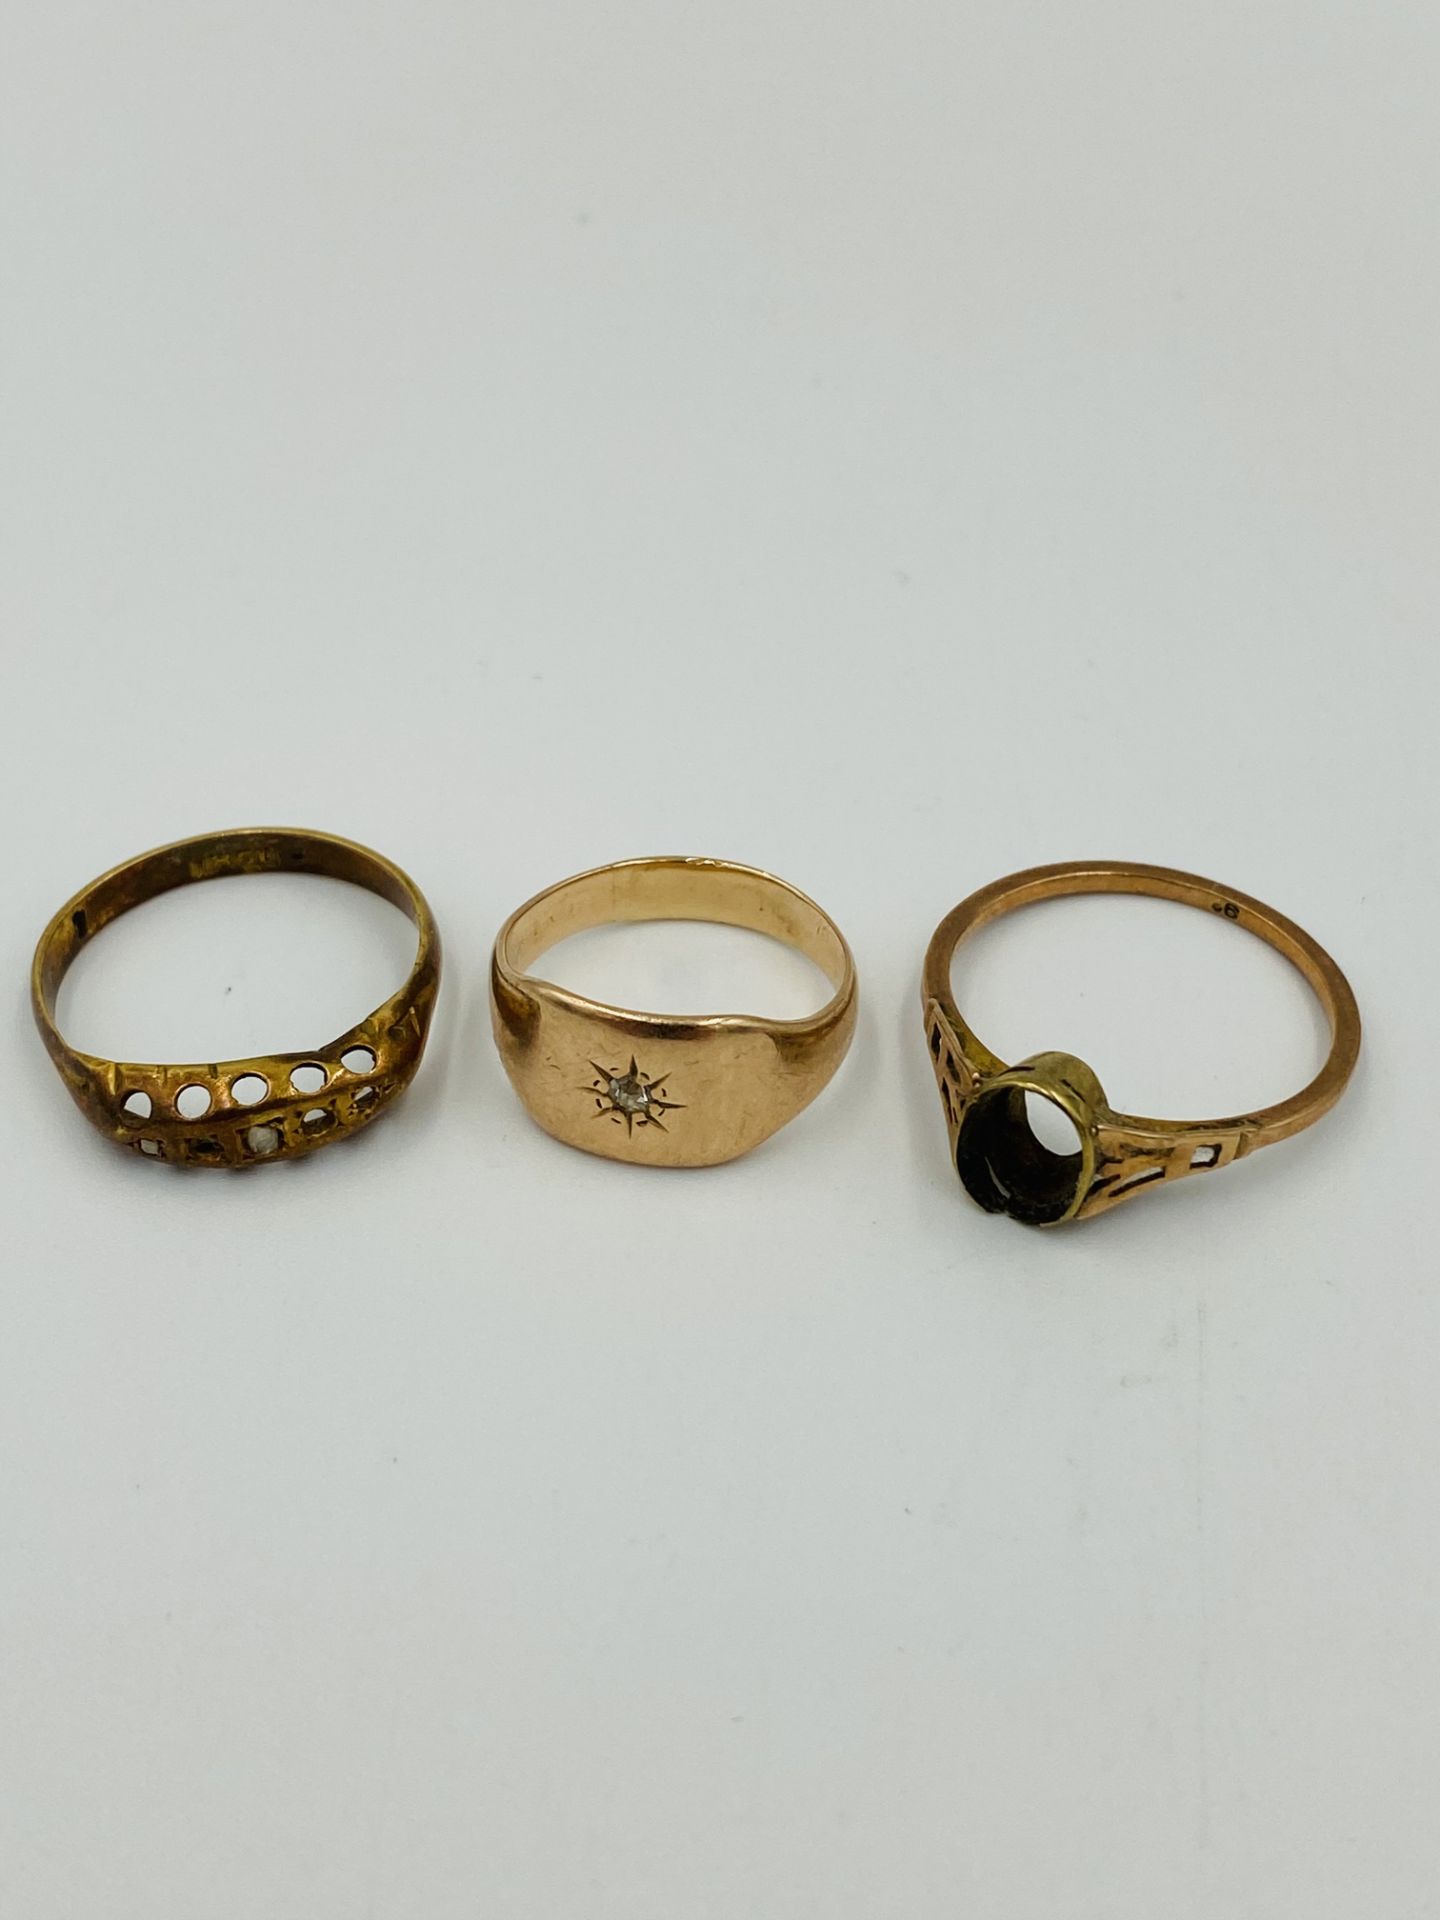 Two gold rings together with a yellow metal ring - Bild 3 aus 3